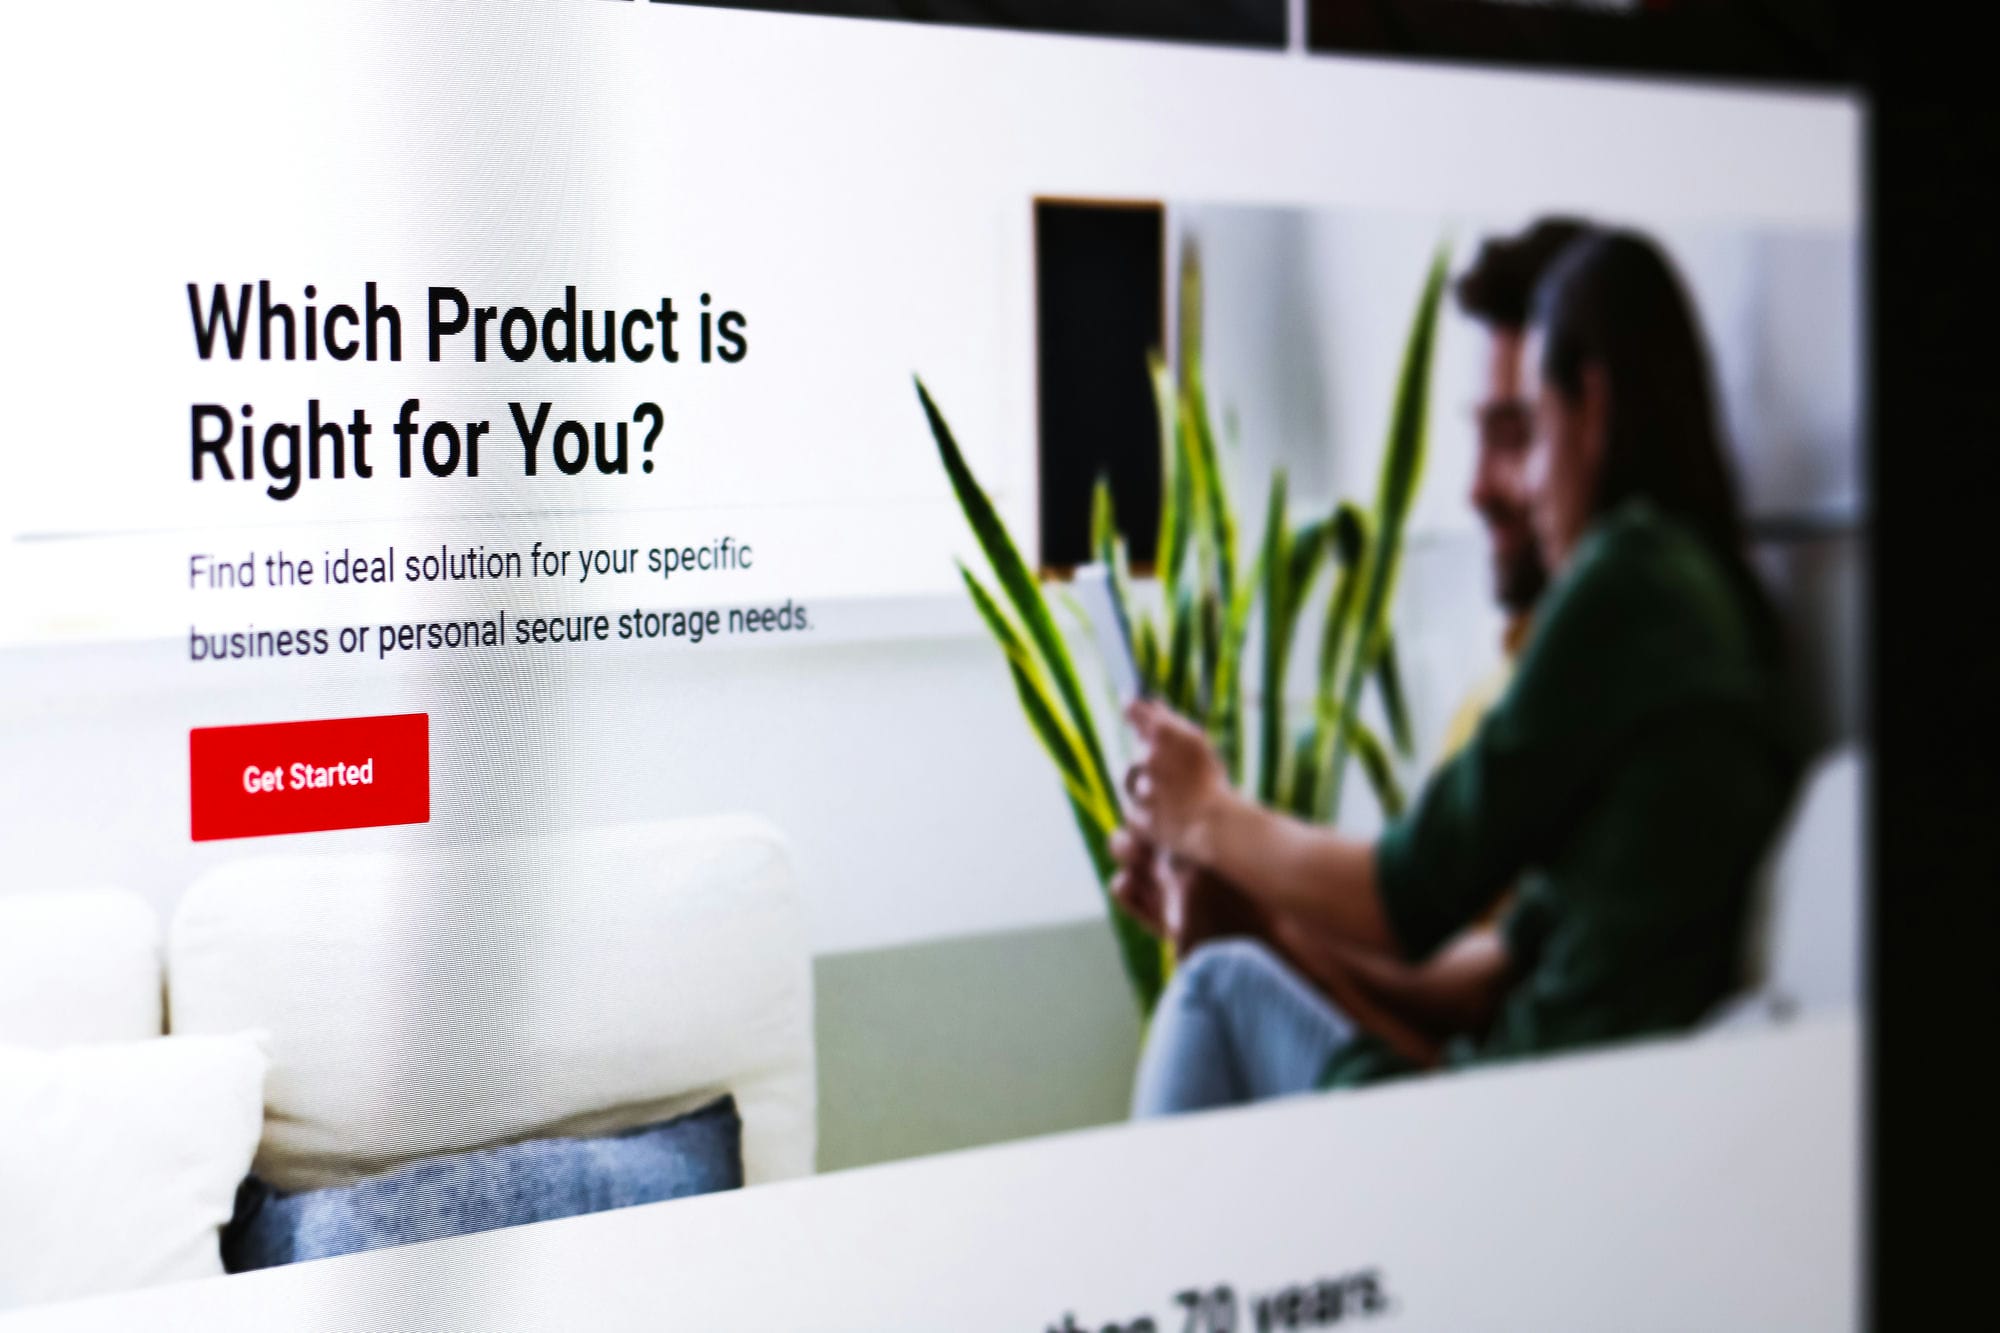 Web page header asking 'Which Product is Right for You?' with a 'Get Started' button, person with laptop in the background.